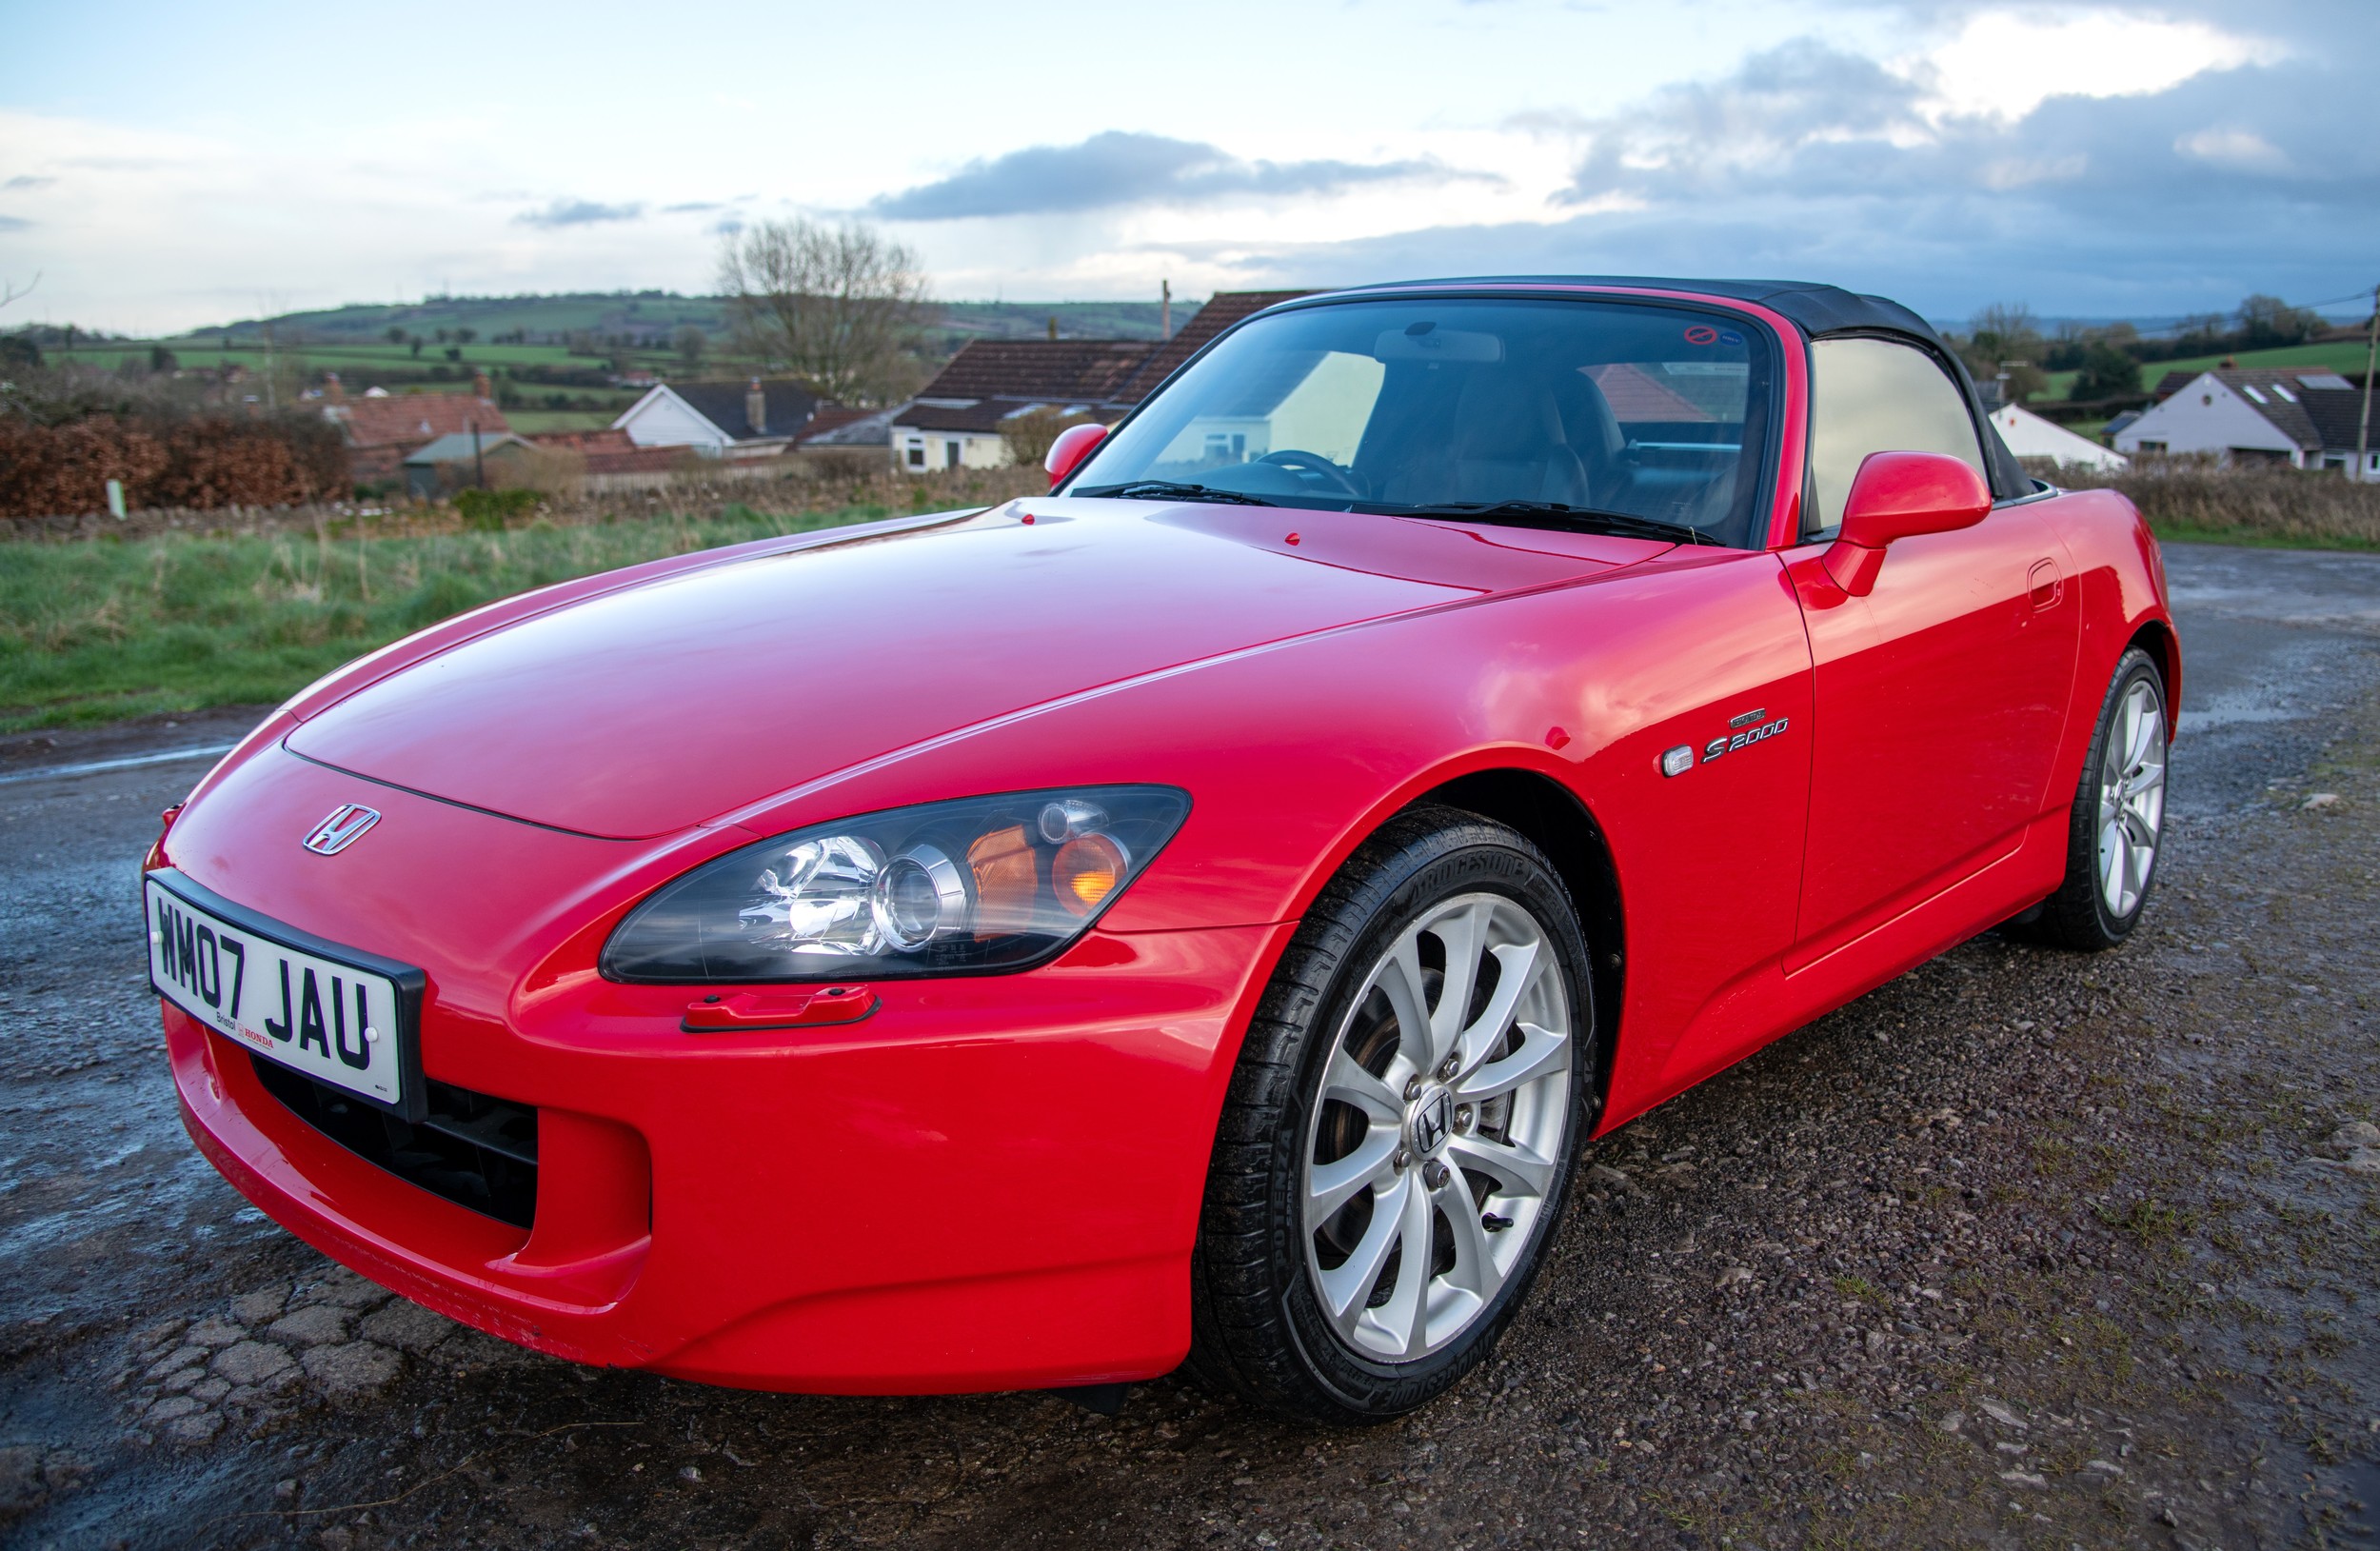 2007 HONDA S2000 Registration Number: WM07 JAU Chassis Number: JHMAP11207S200009 Recorded Mileage: